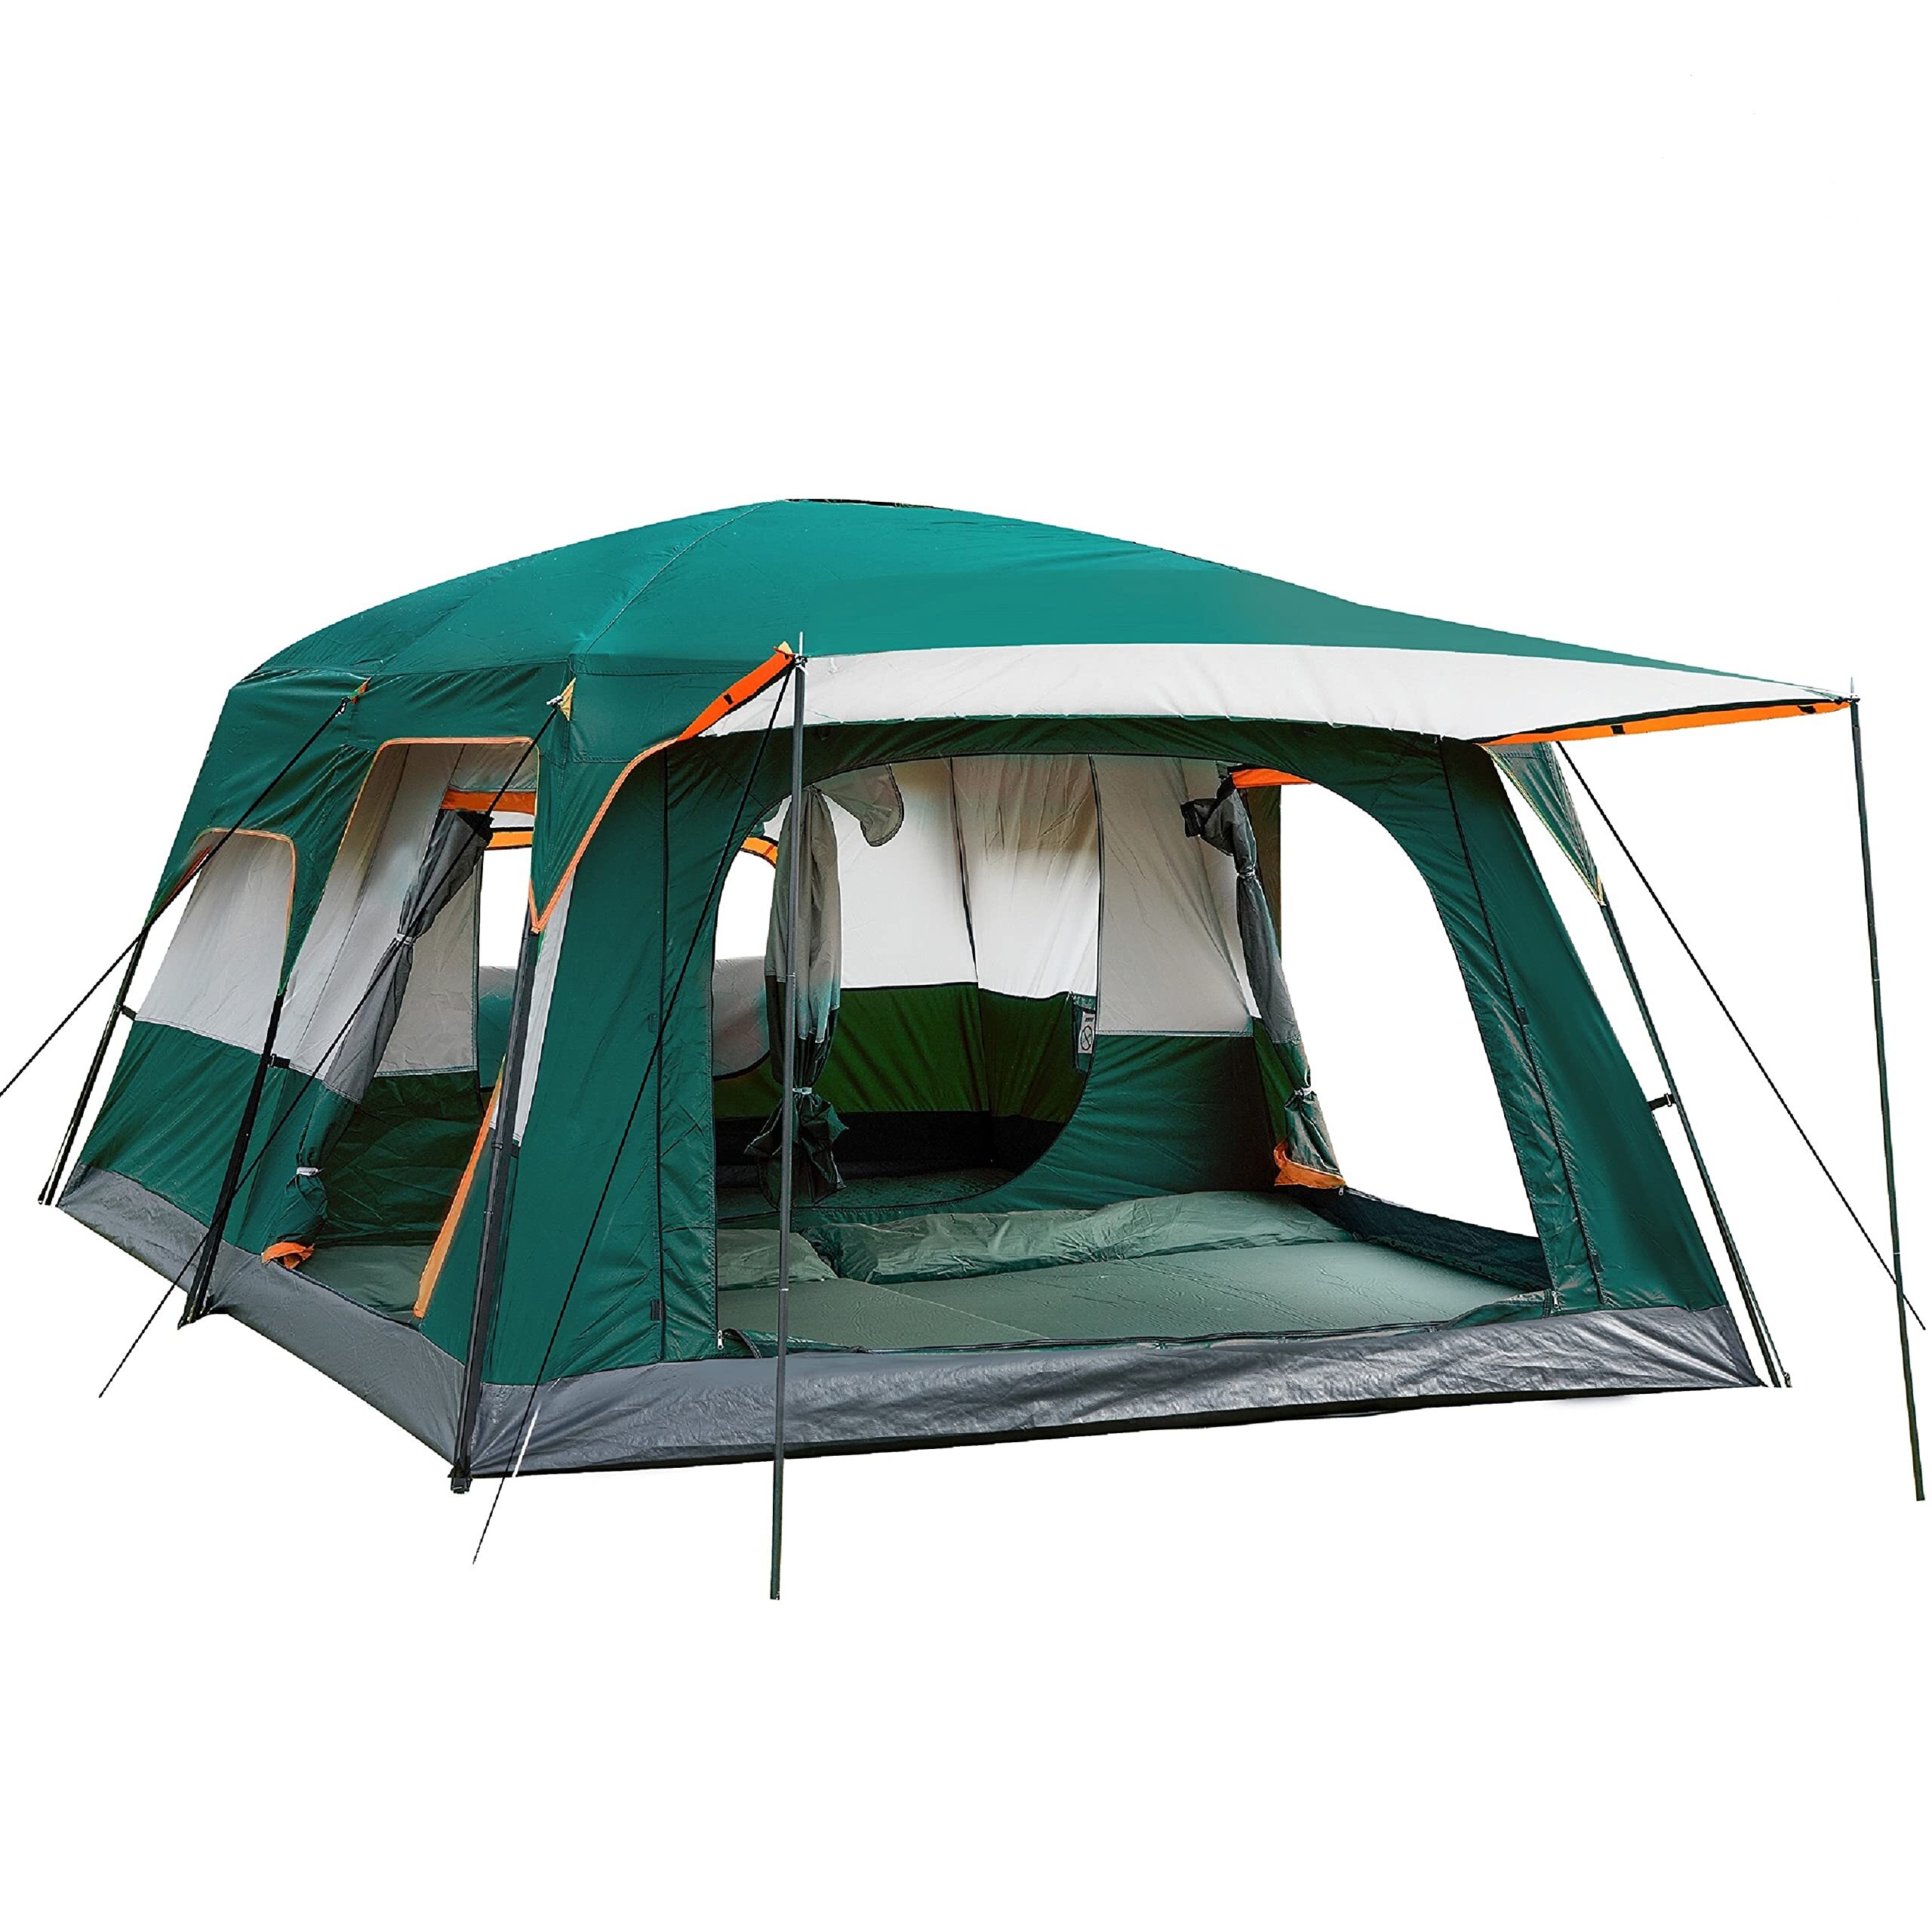 Extra Large Tent 12 Person,Family Cabin Tents,2 Rooms